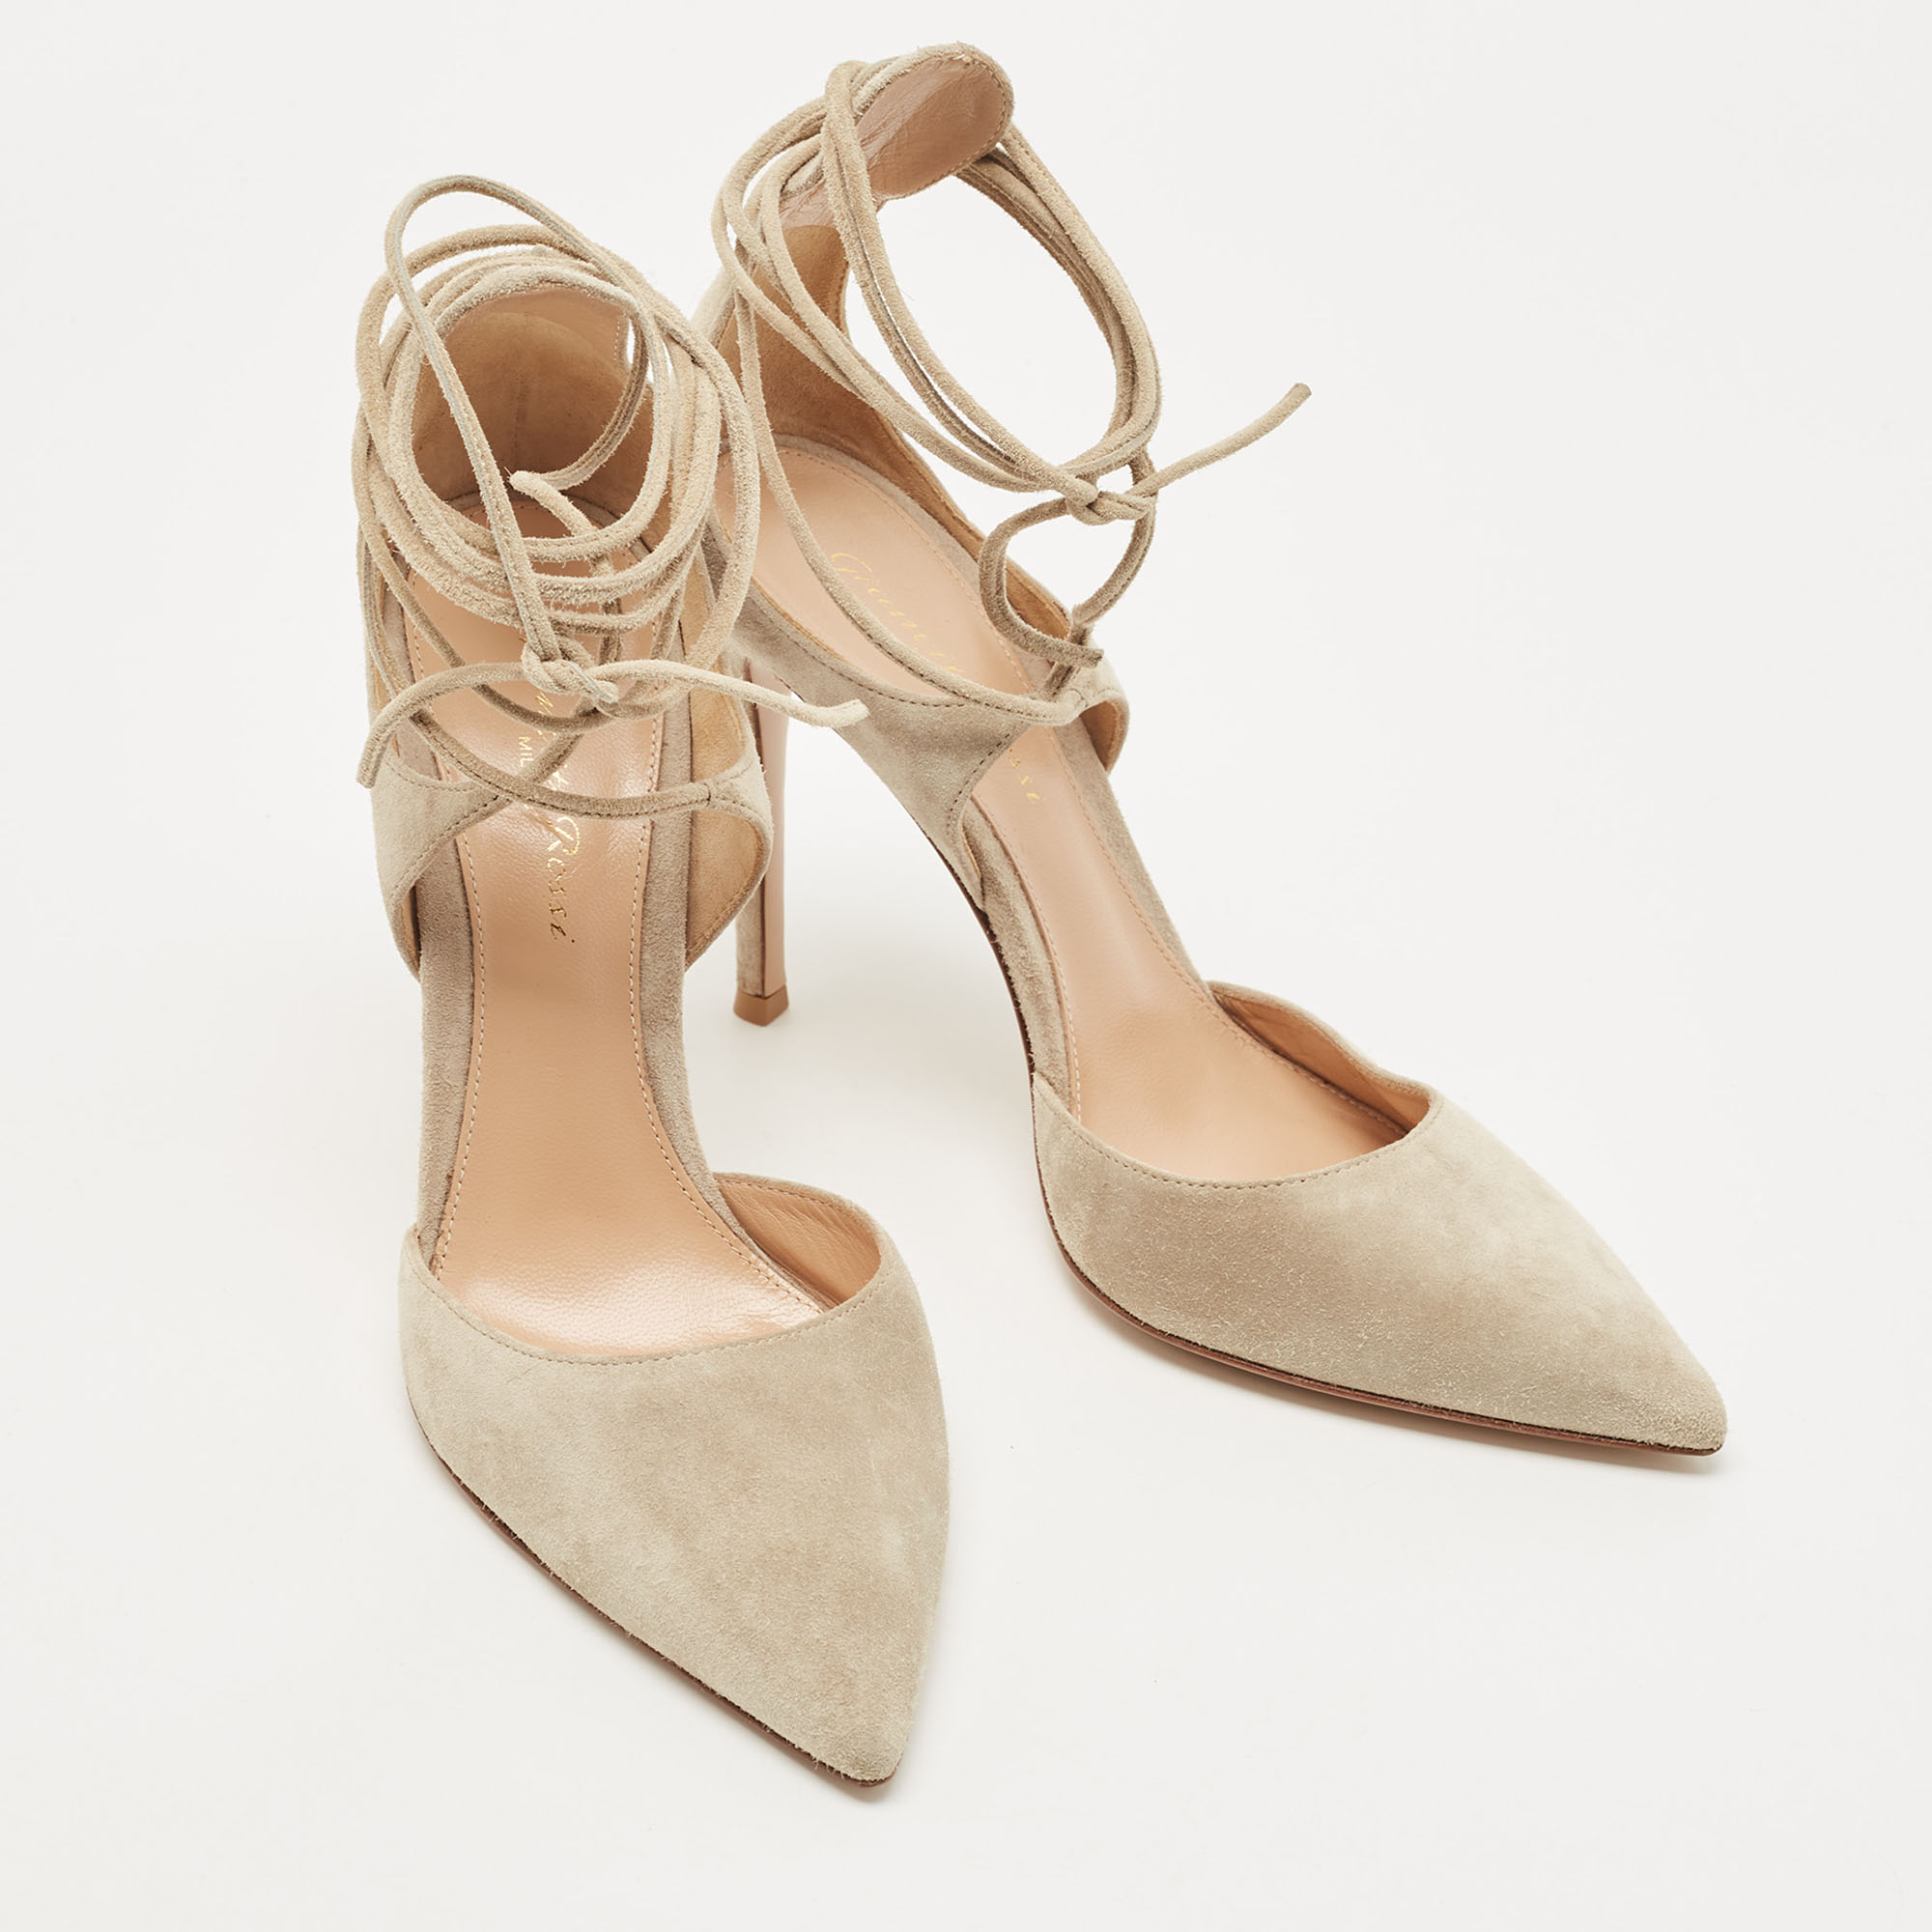 Gianvito Rossi Beige Suede Ankle Wrap Pointed Toe Pumps Size 37.5